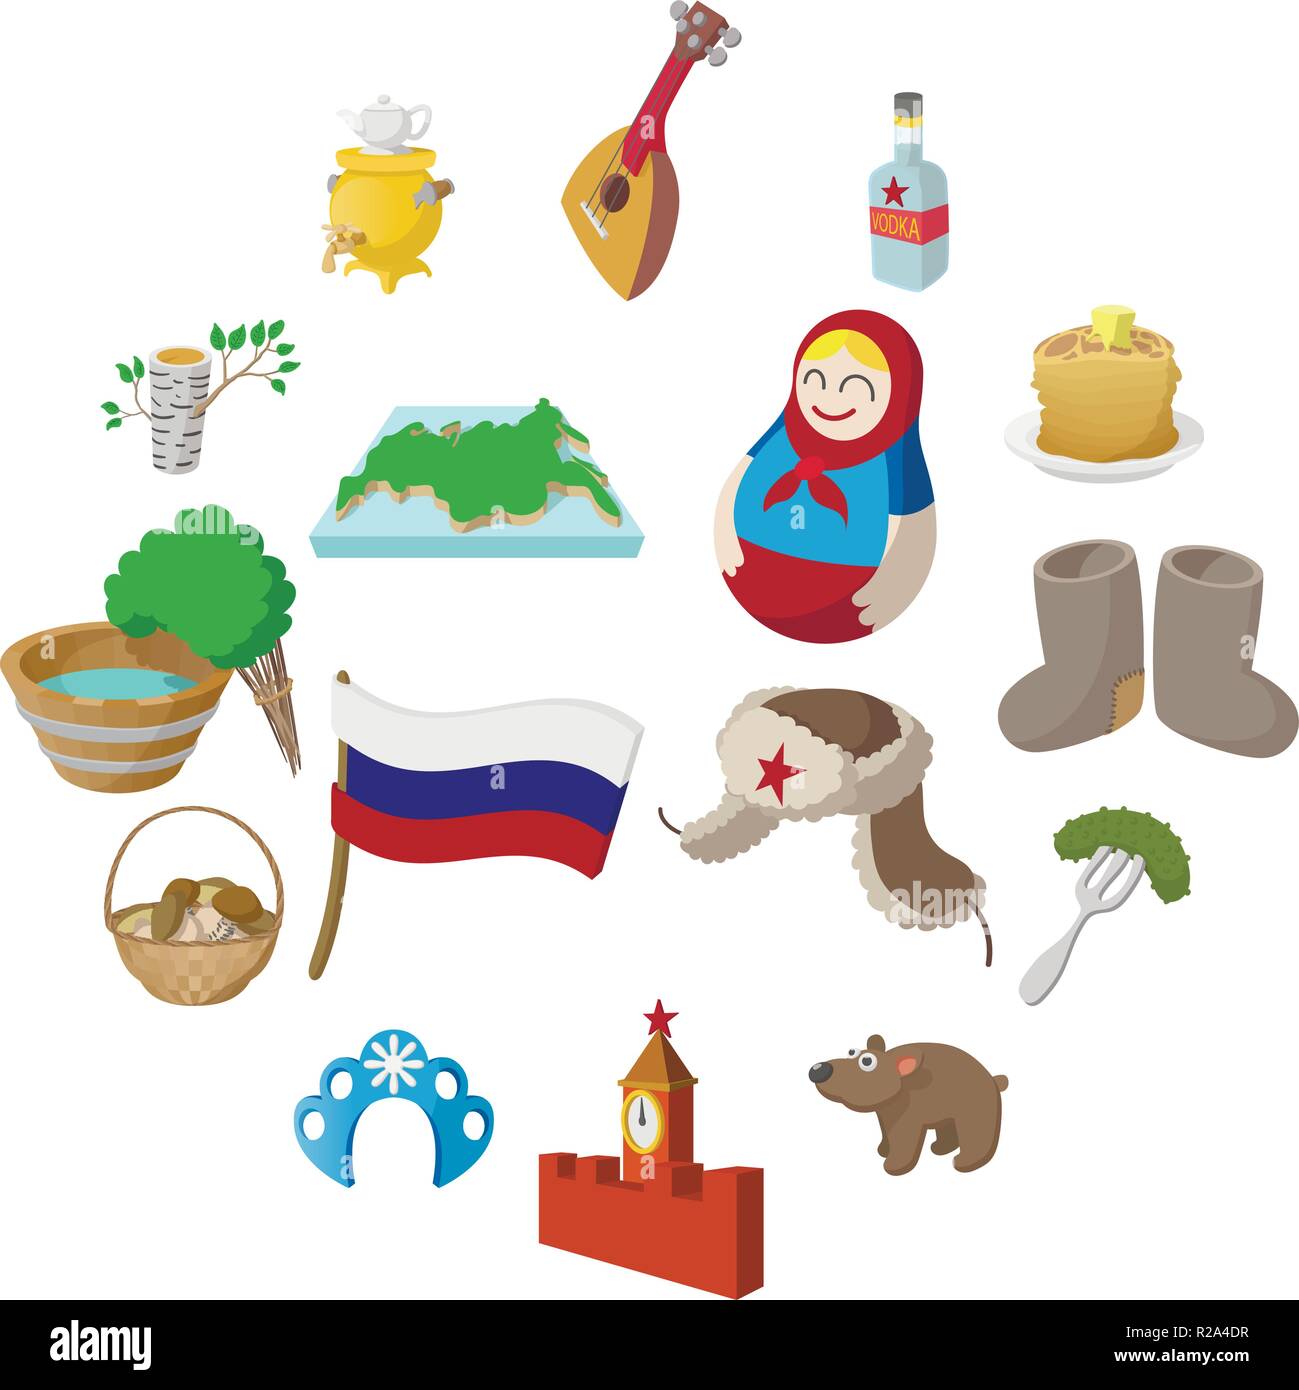 Russia cartoon icons set isolated on white background Stock Vector